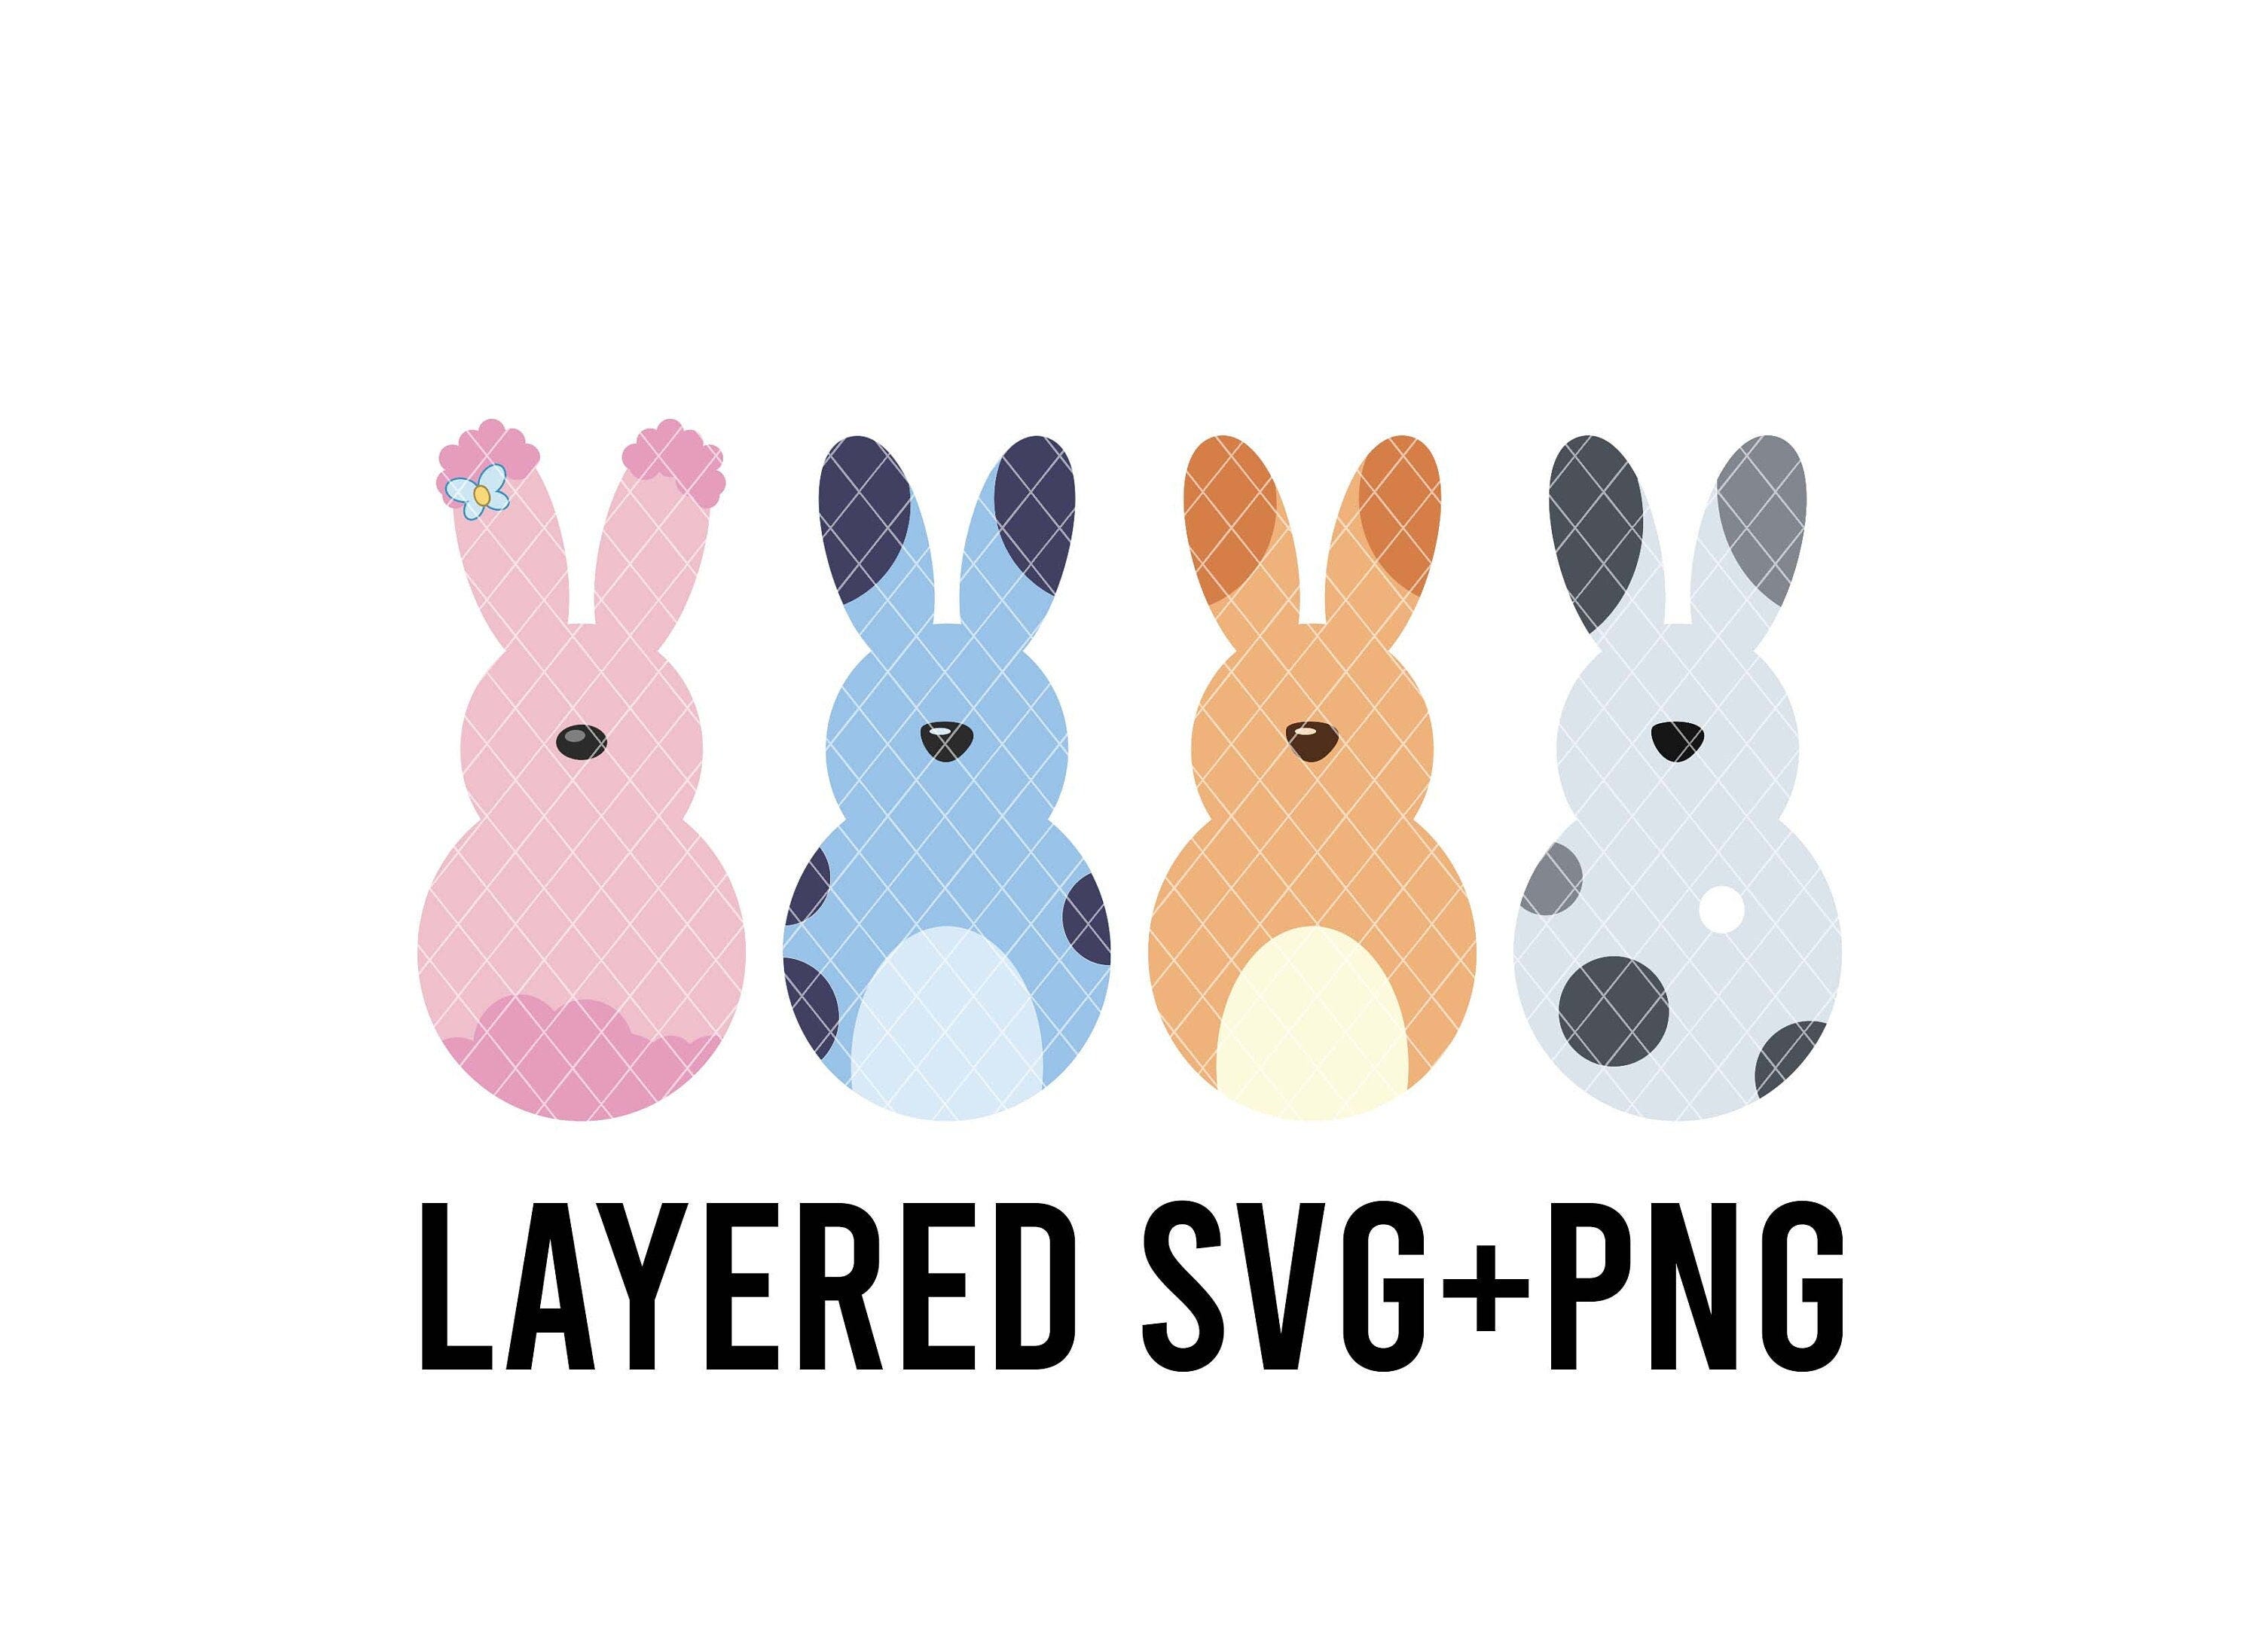 Easter Peeps Cute Puppy Marshmallows  SVG Set Layered By colour + PNG, Cricut Silhouette